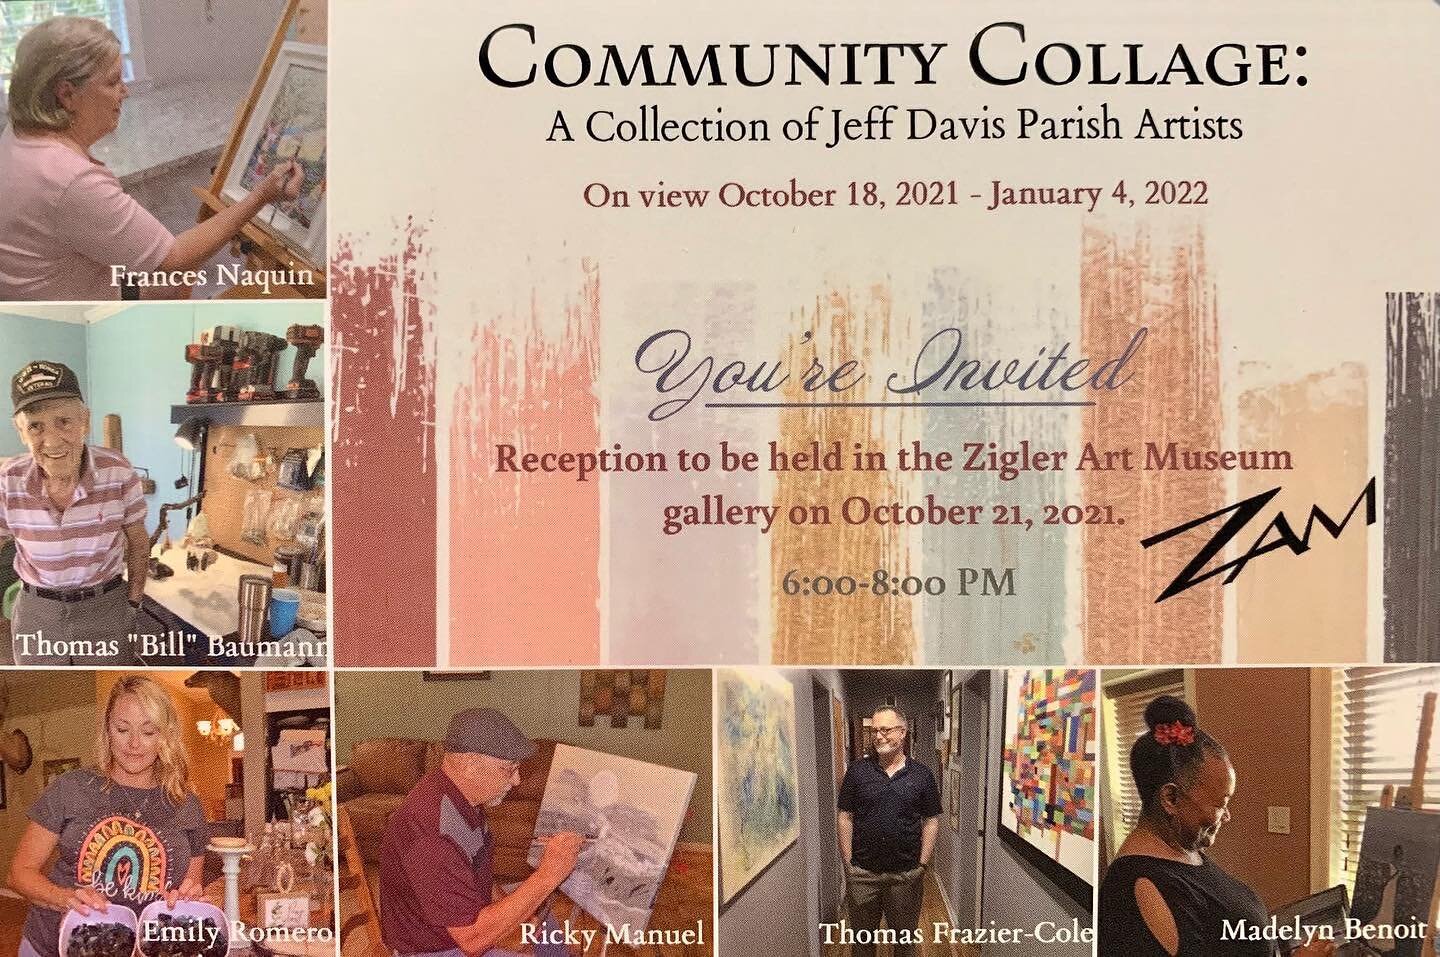 ✨You&rsquo;re invited!✨ Join us in celebrating 6 local artists whose creativity and talent shape our vibrant community. Reception TONIGHT at 6PM! 🎨🖌 #jeffdavisparish #onlylouisiana #ziglerartmuseum #communitycollage